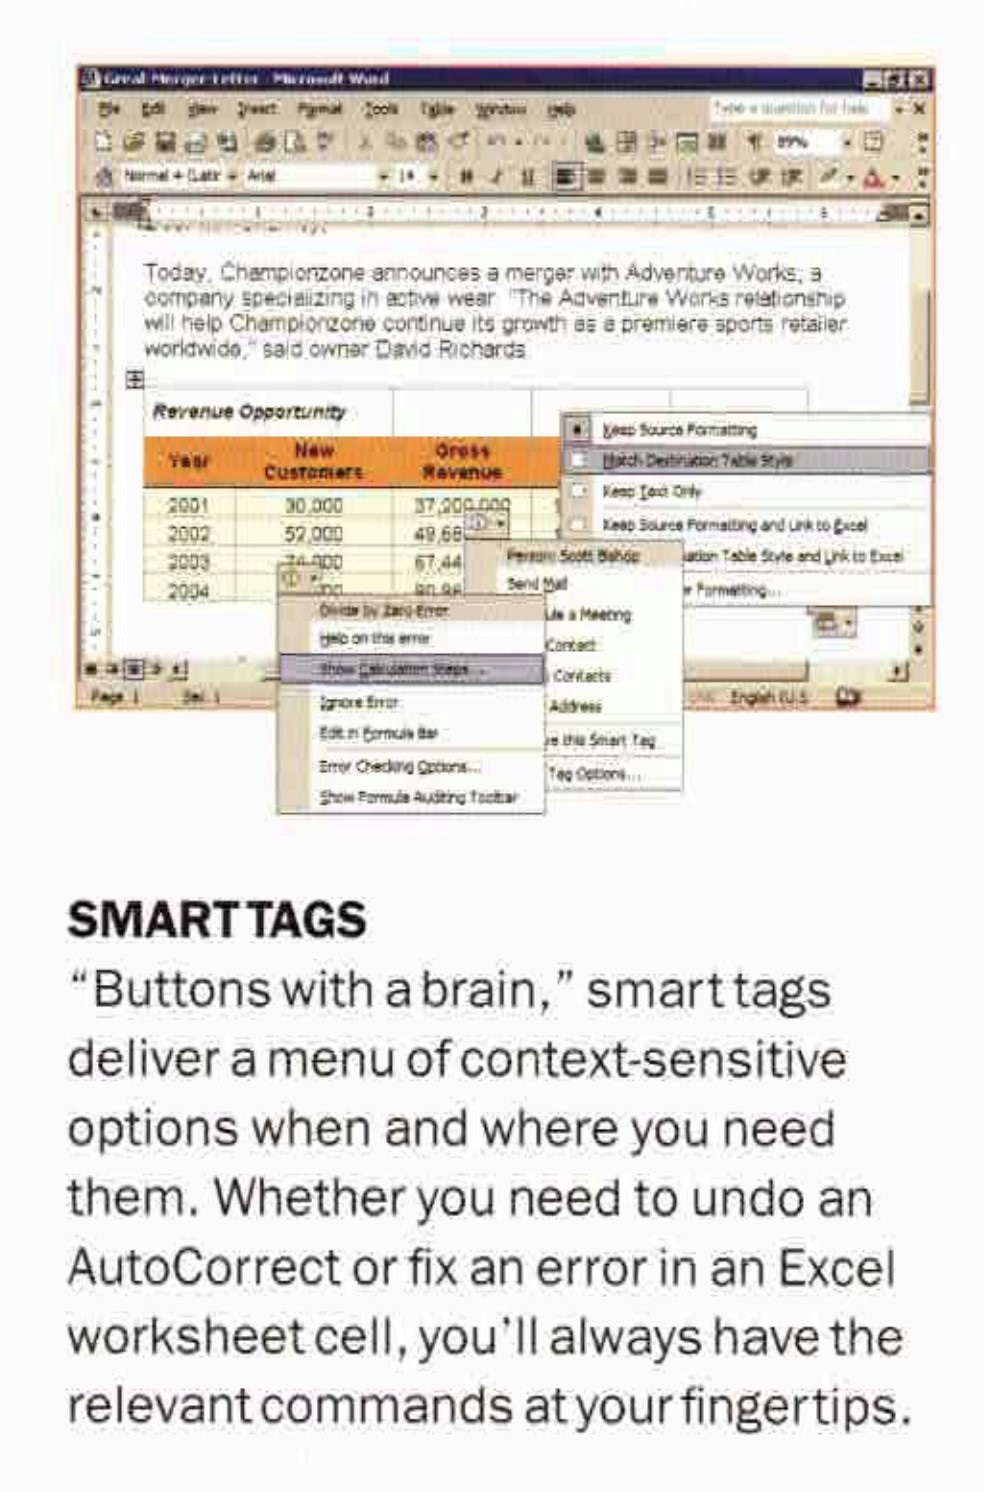 Smart Tags: "Buttons with a brain"